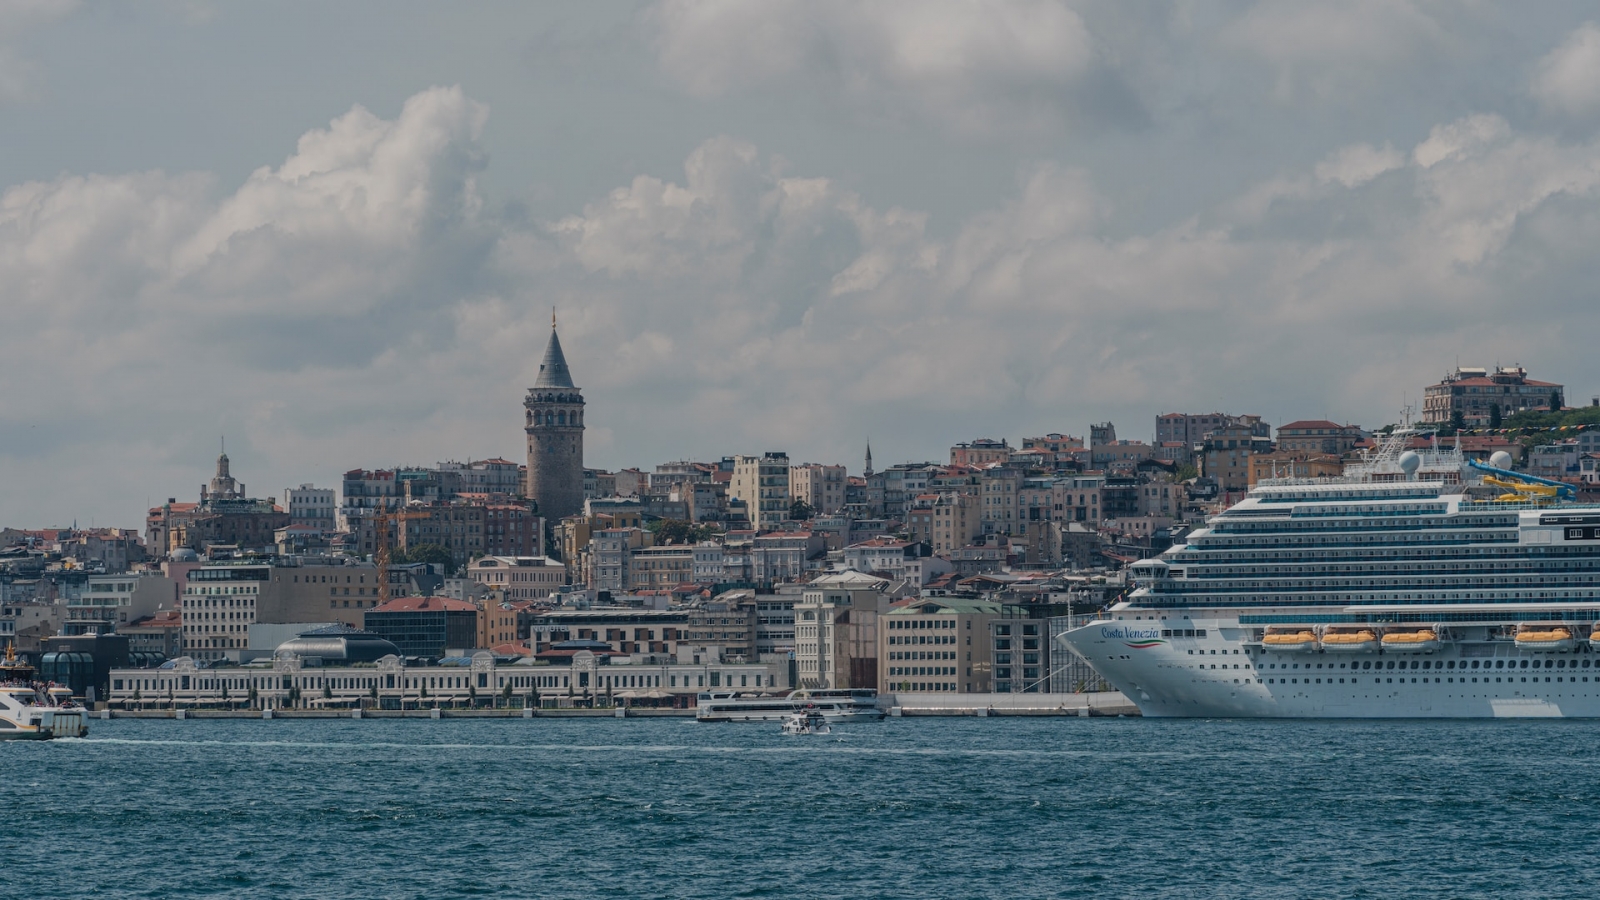 Cruise Liner in the Golden Horn Bay in Istanbul